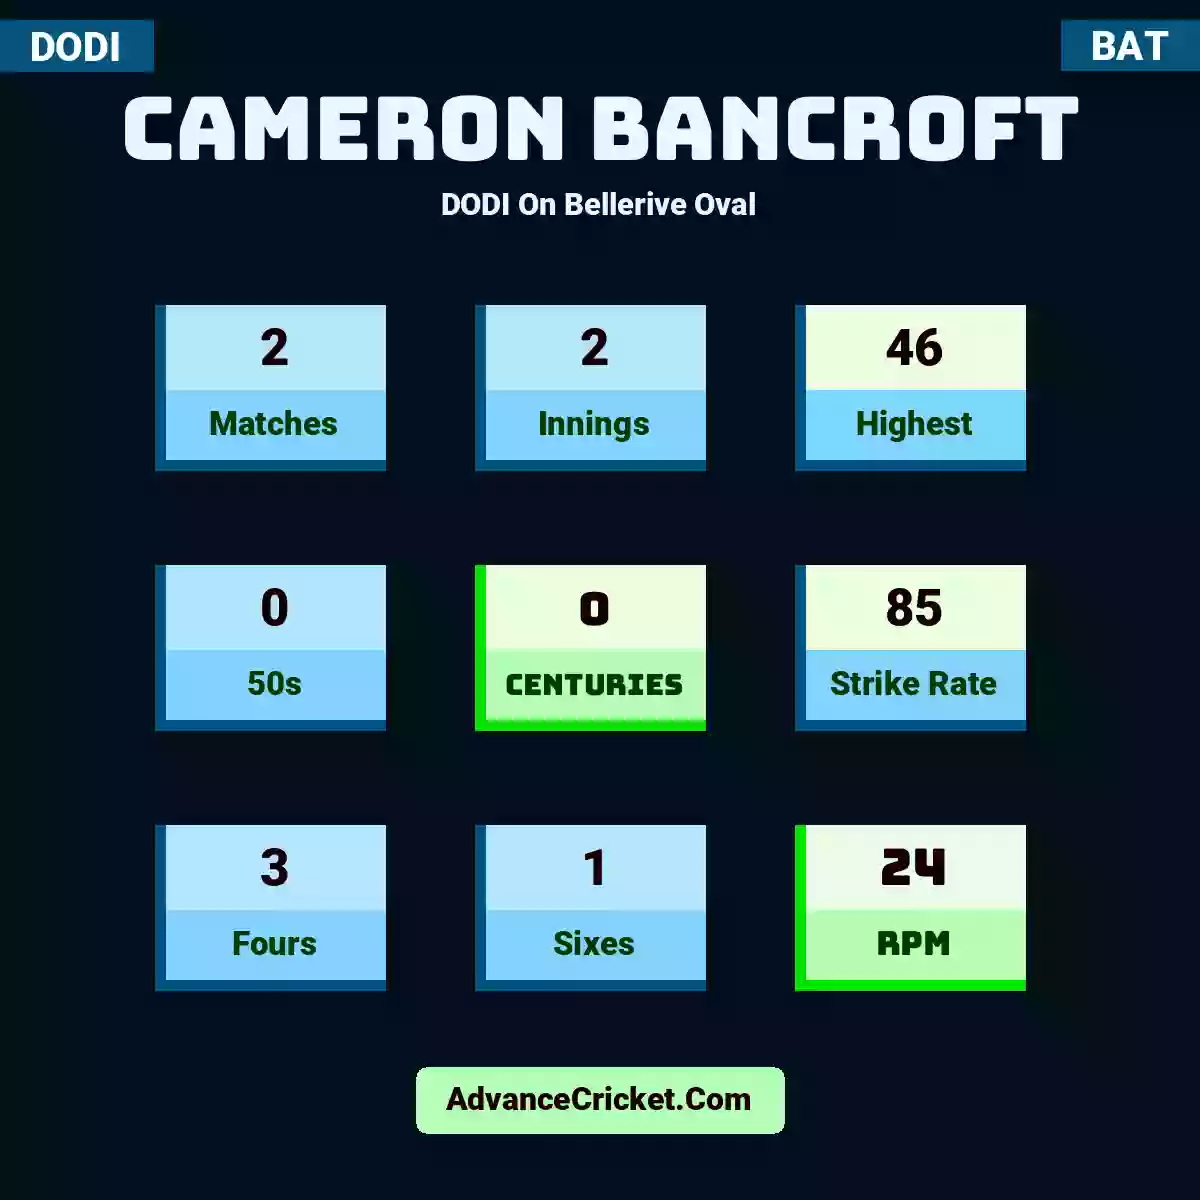 Cameron Bancroft DODI  On Bellerive Oval, Cameron Bancroft played 2 matches, scored 46 runs as highest, 0 half-centuries, and 0 centuries, with a strike rate of 85. C.Bancroft hit 3 fours and 1 sixes, with an RPM of 24.